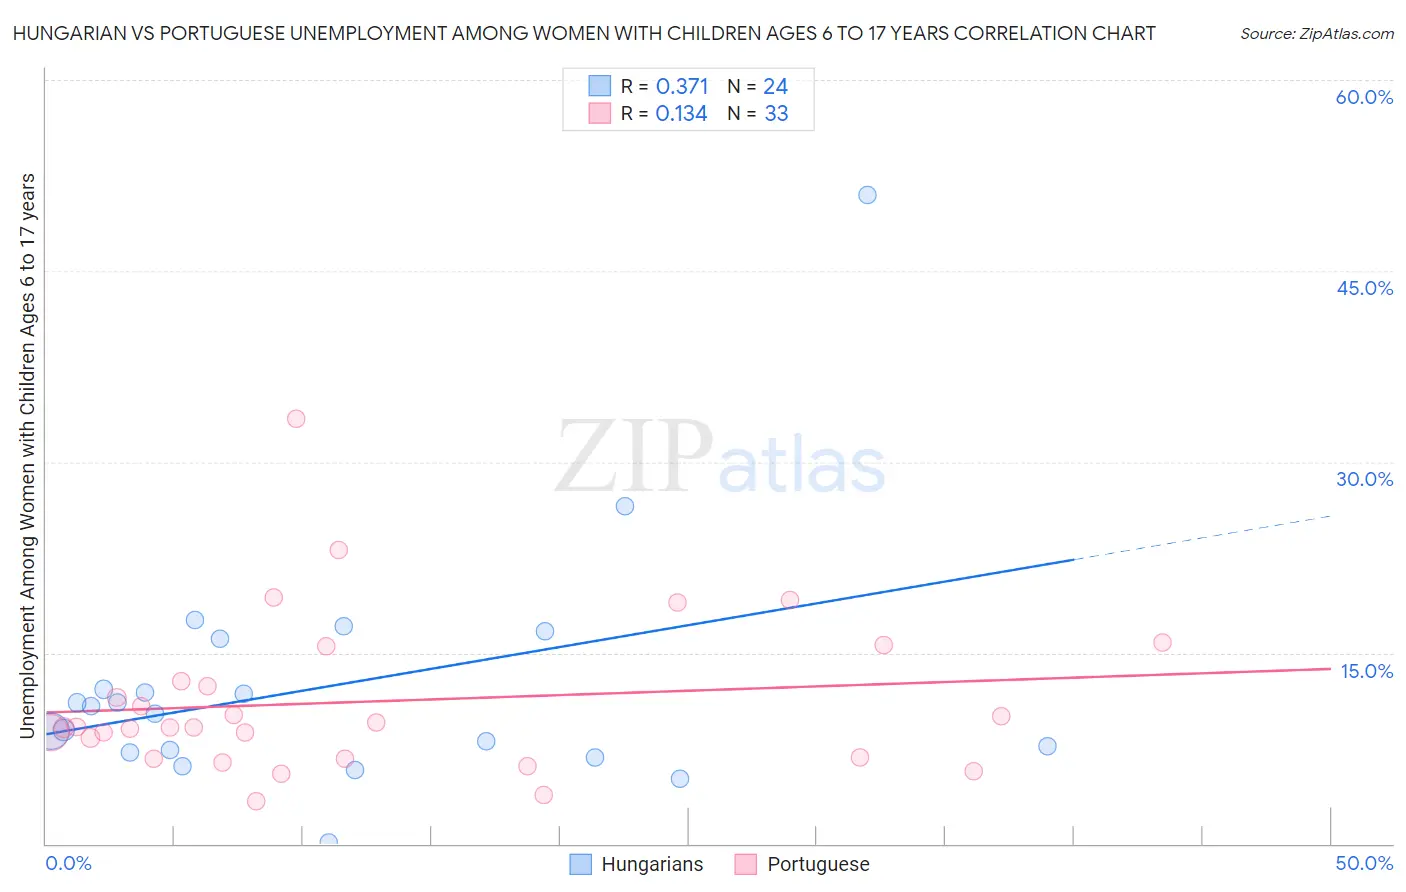 Hungarian vs Portuguese Unemployment Among Women with Children Ages 6 to 17 years